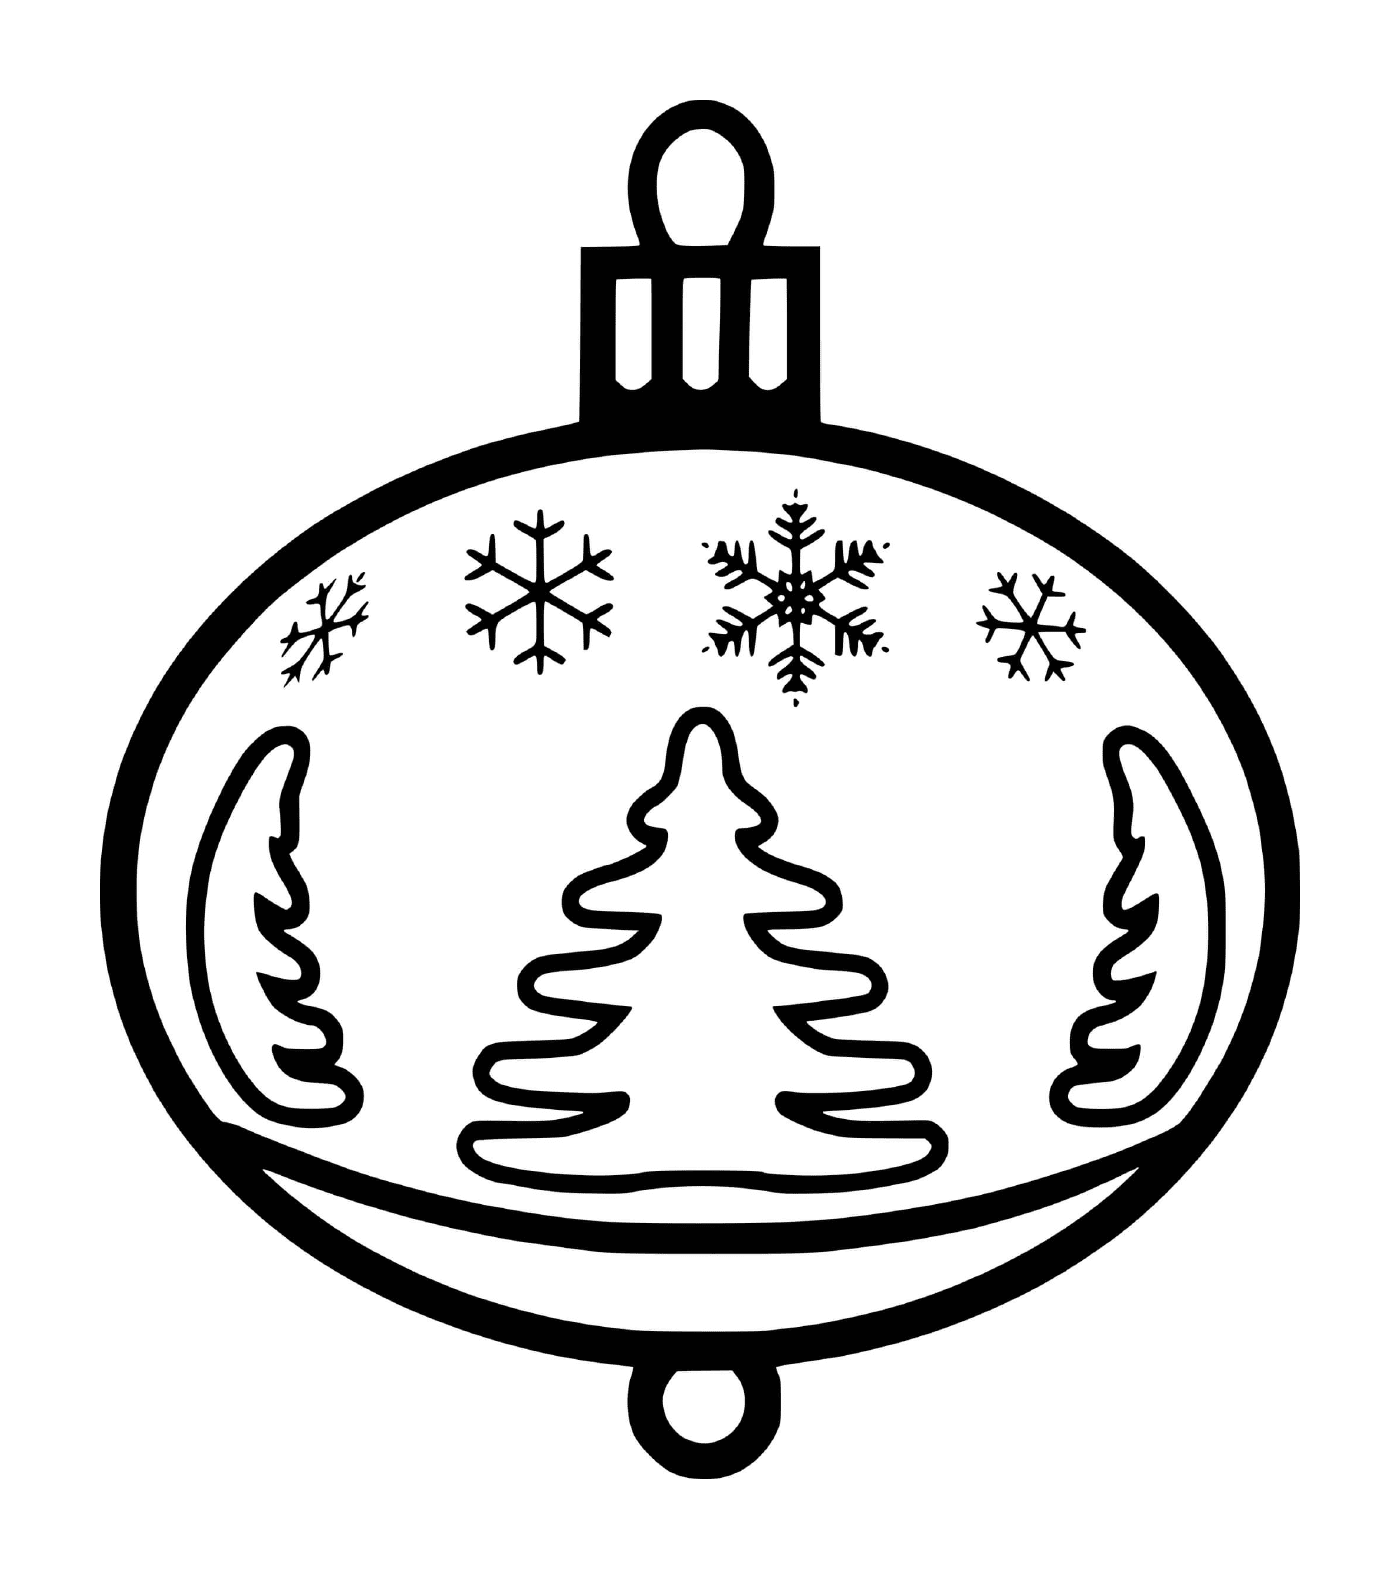  A Christmas ball with snowflakes and fir trees 